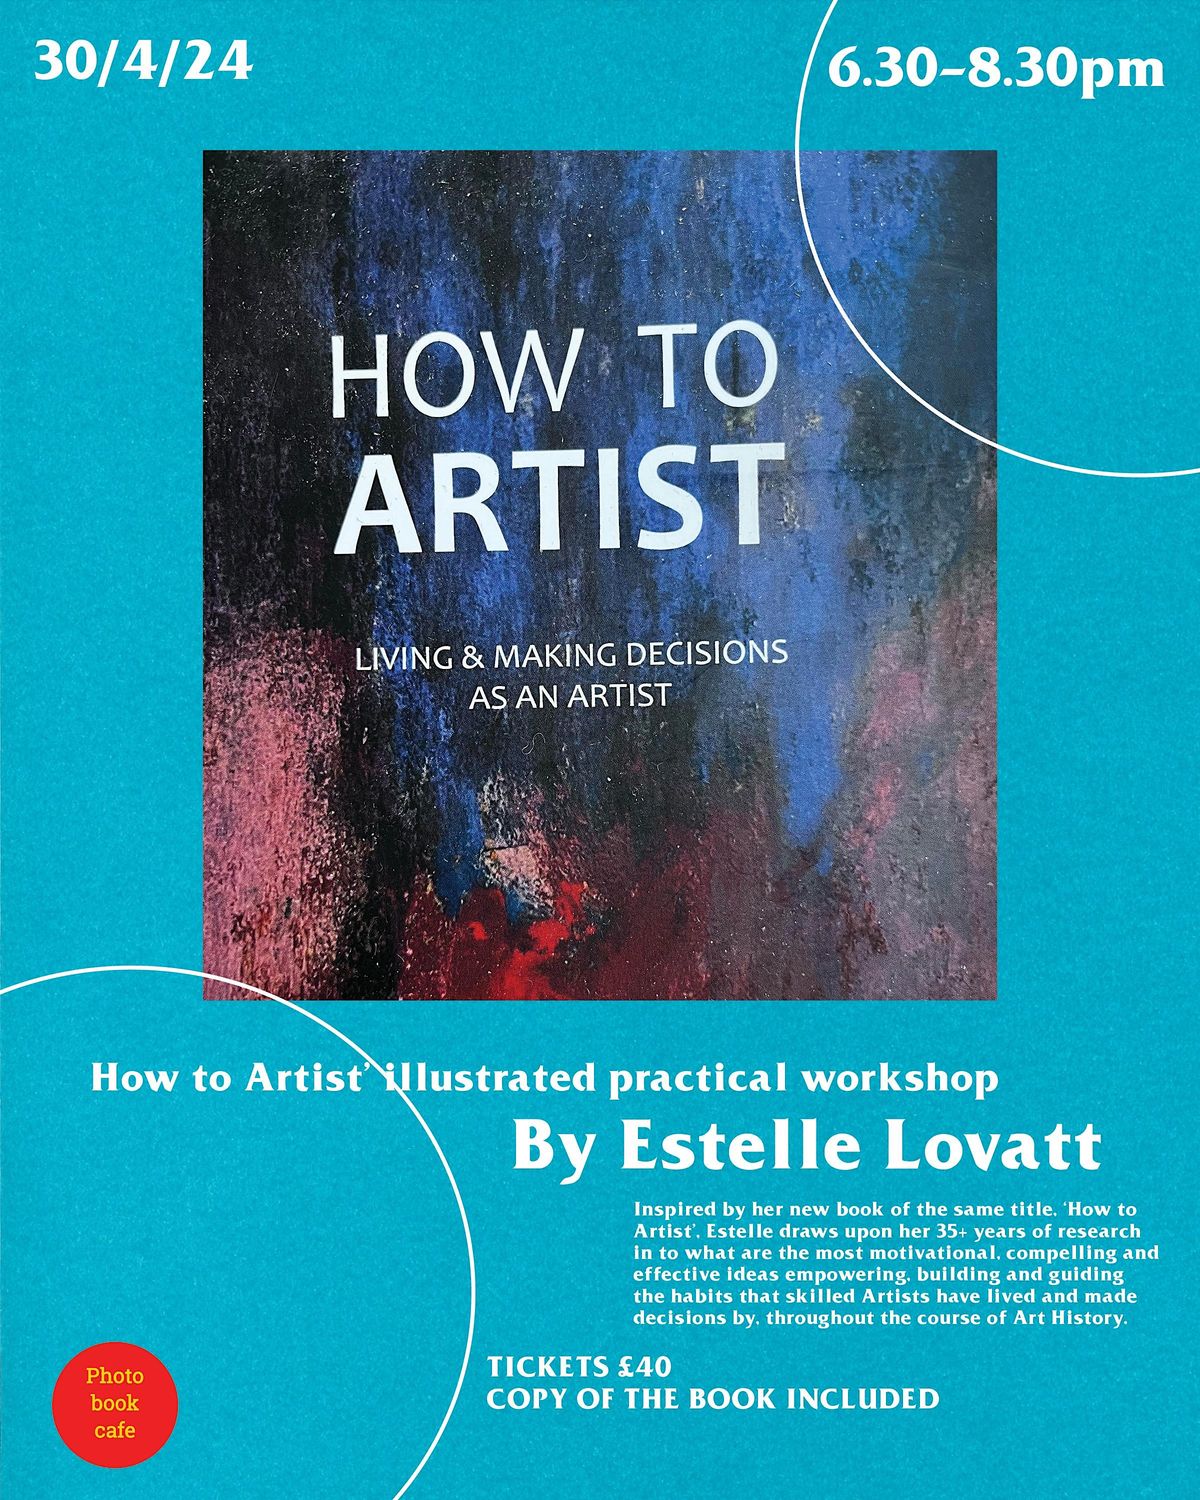 How To Be A Great Artist workshop\/lecture inspired by artists & art history